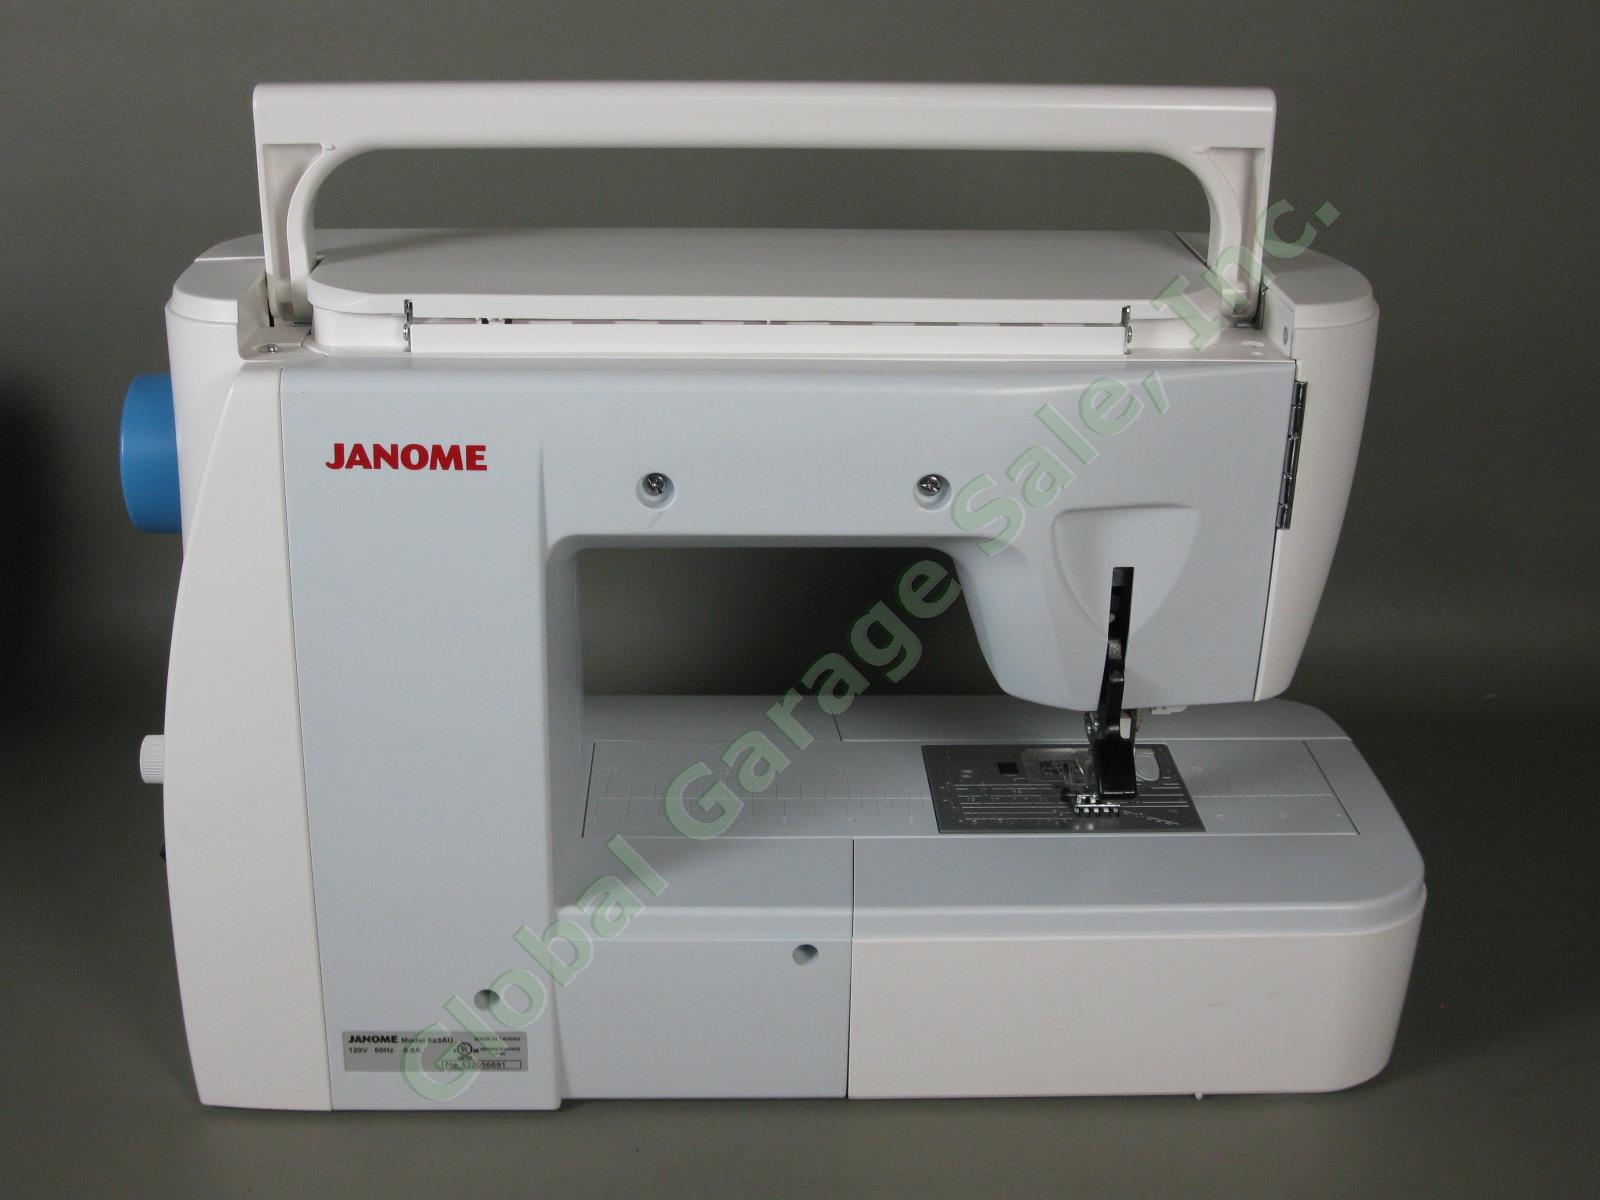 Janome Skyline S7 Sewing Quilting Machine Barely Used! Mint Condition! Orig Box! 3